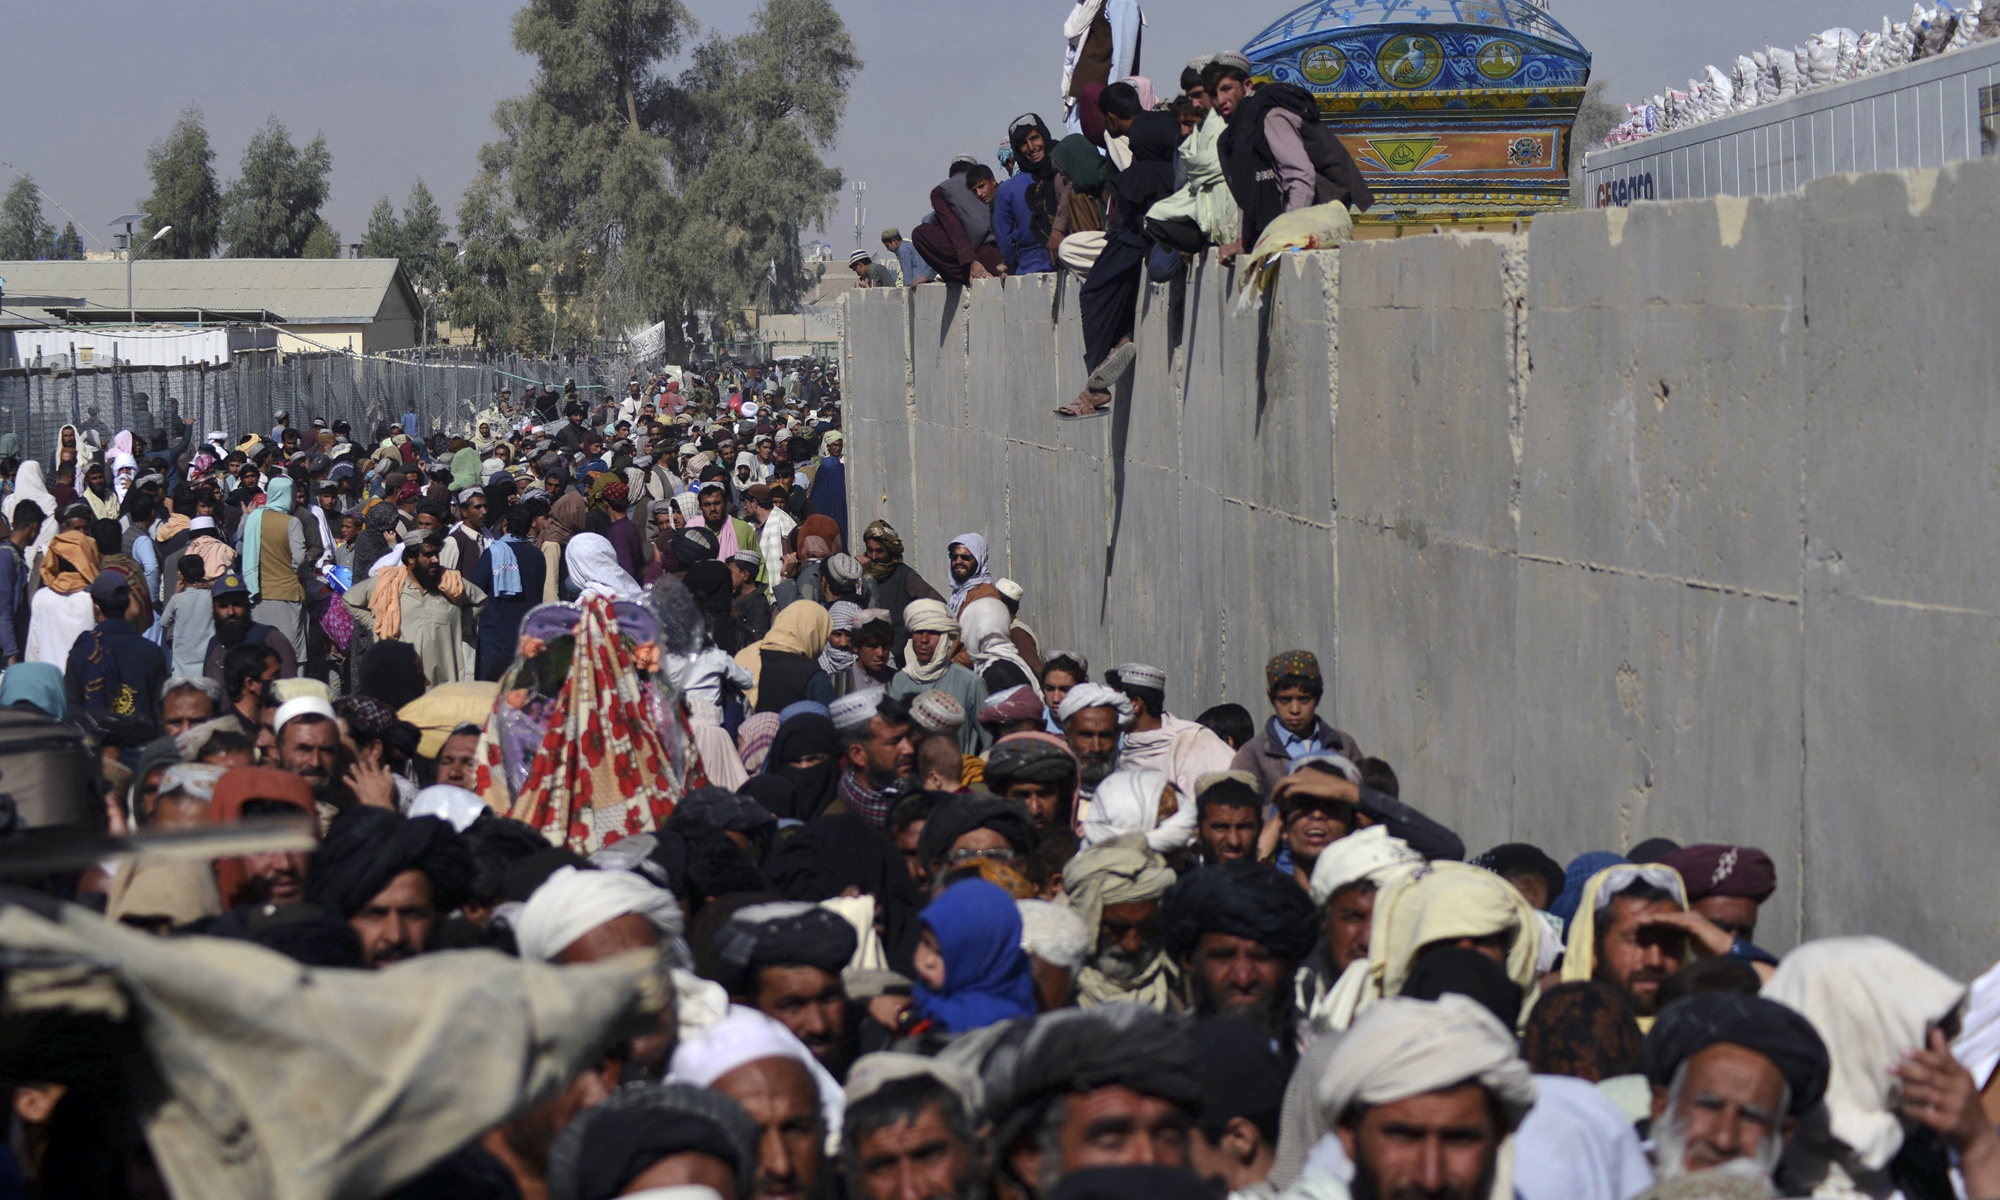 People wait to cross into Pakistan at the Afghanistan-Pakistan border crossing point, in Spin Boldak on November 3, 2021, after authorities reopened the border following a month-long closure (See story on Page 4). Photo: AFP